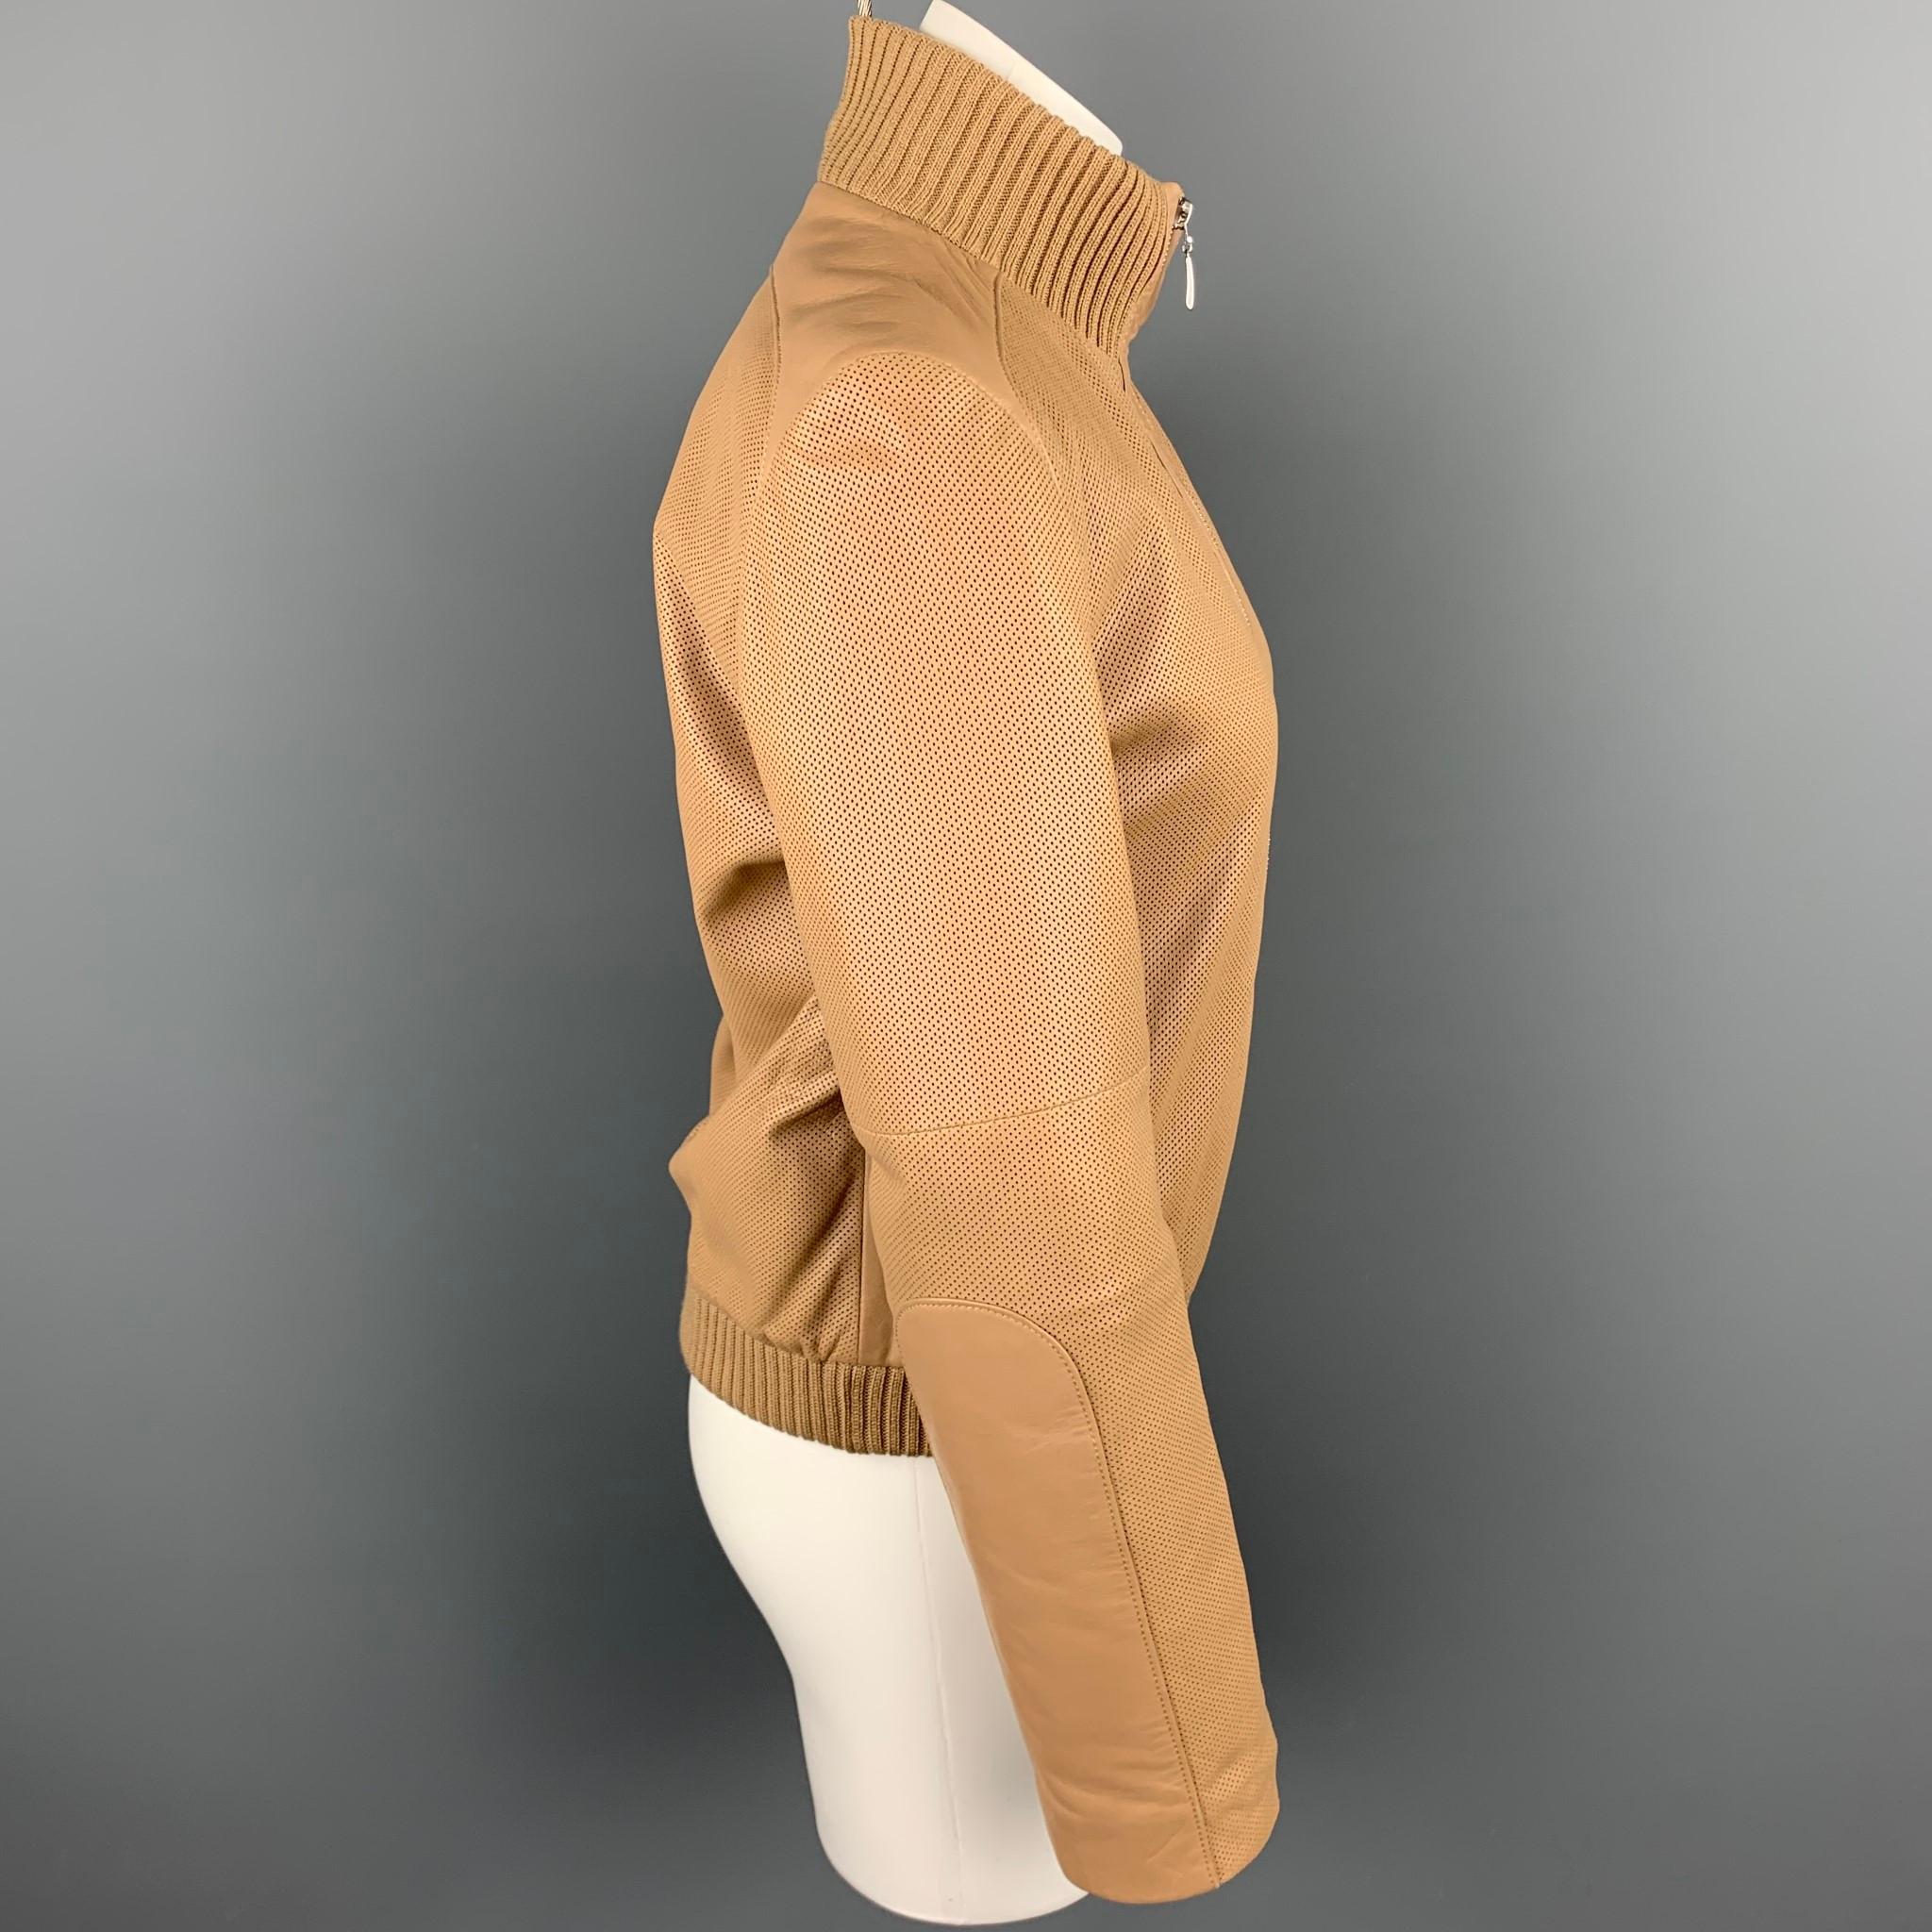 ESCADA jacket comes in a beige perforated leather with a quilted liner featuring a bomber style, wool sleeves, slit pockets, and a zip up closure. 

Very Good Pre-Owned Condition.
Marked: 34

Measurements:

Shoulder: 16 in.
Bust: 36 in.
Sleeve: 25